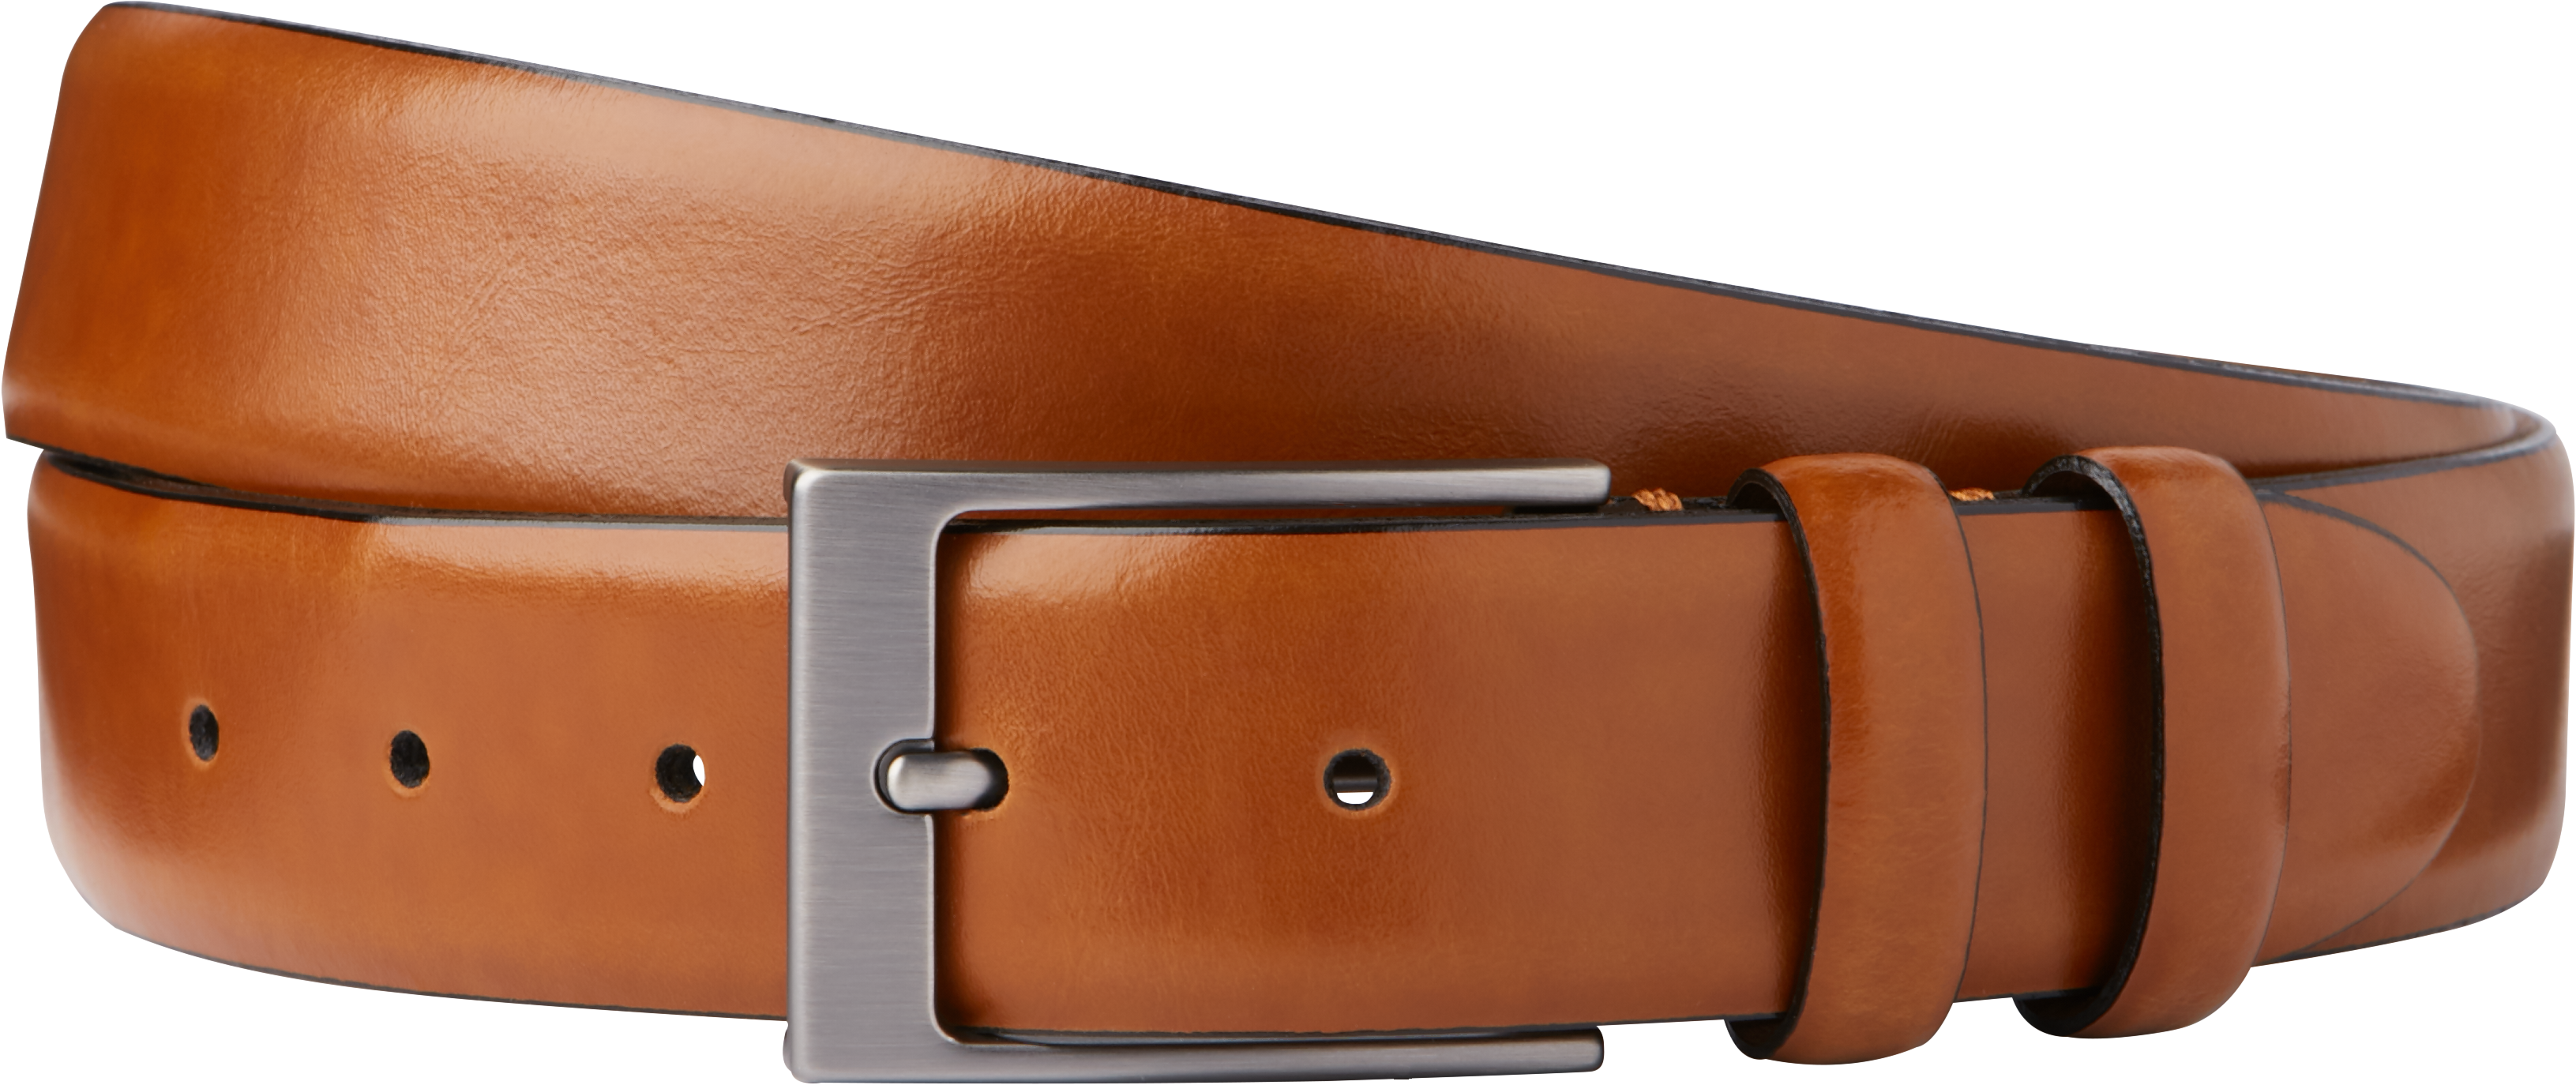 Jos. A. Bank Smooth Leather Belt - Ready for Anything | Jos A Bank